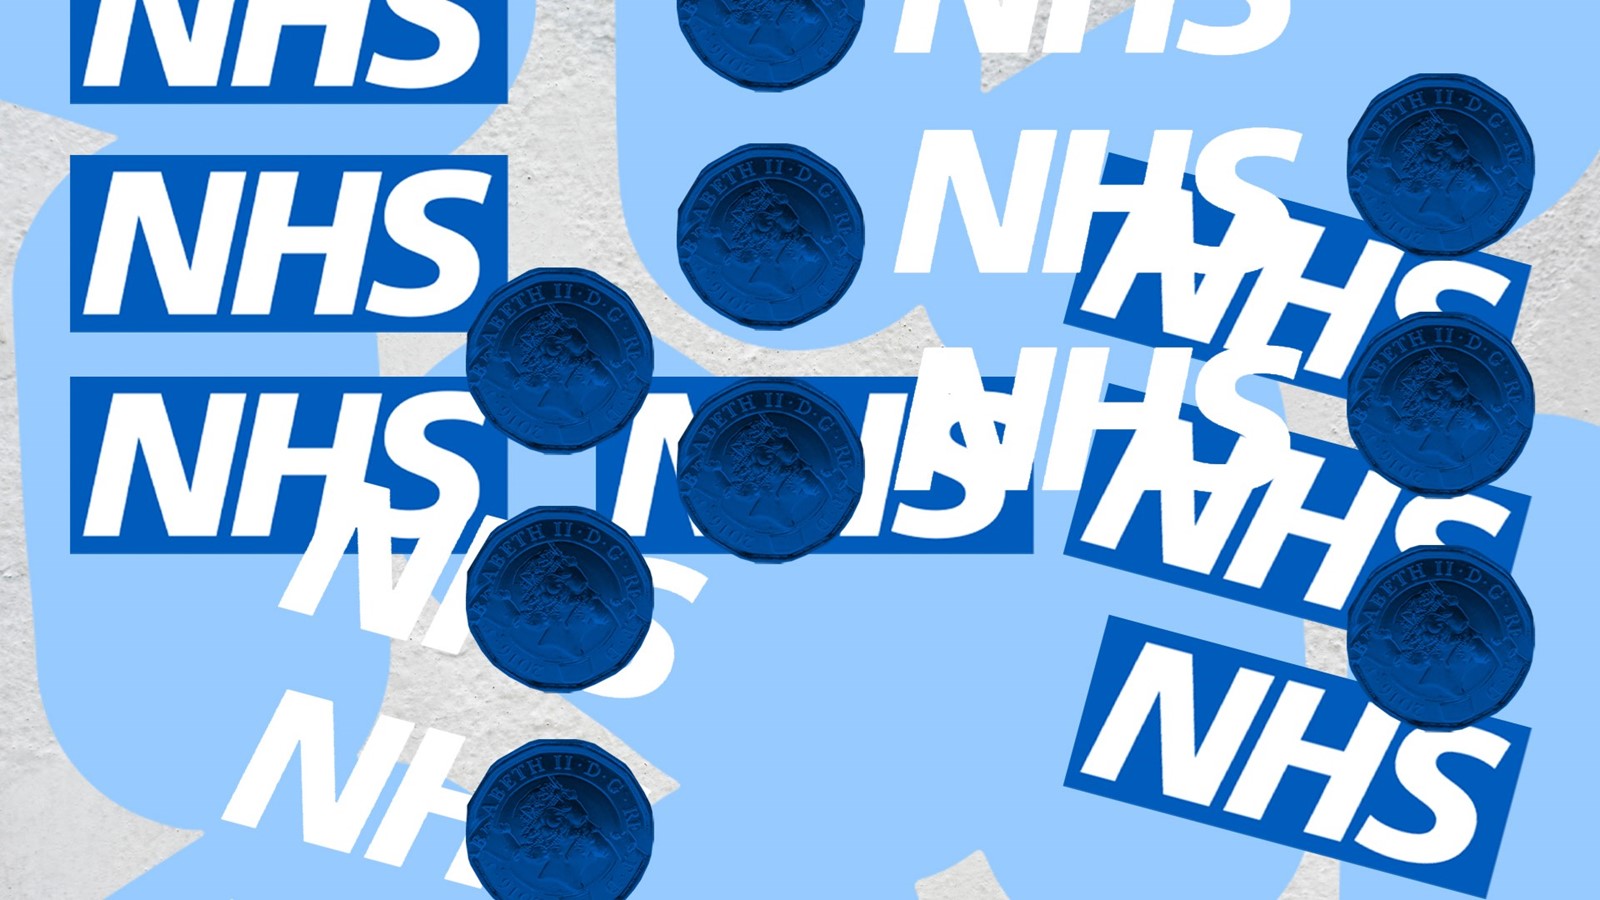 Save our NHS